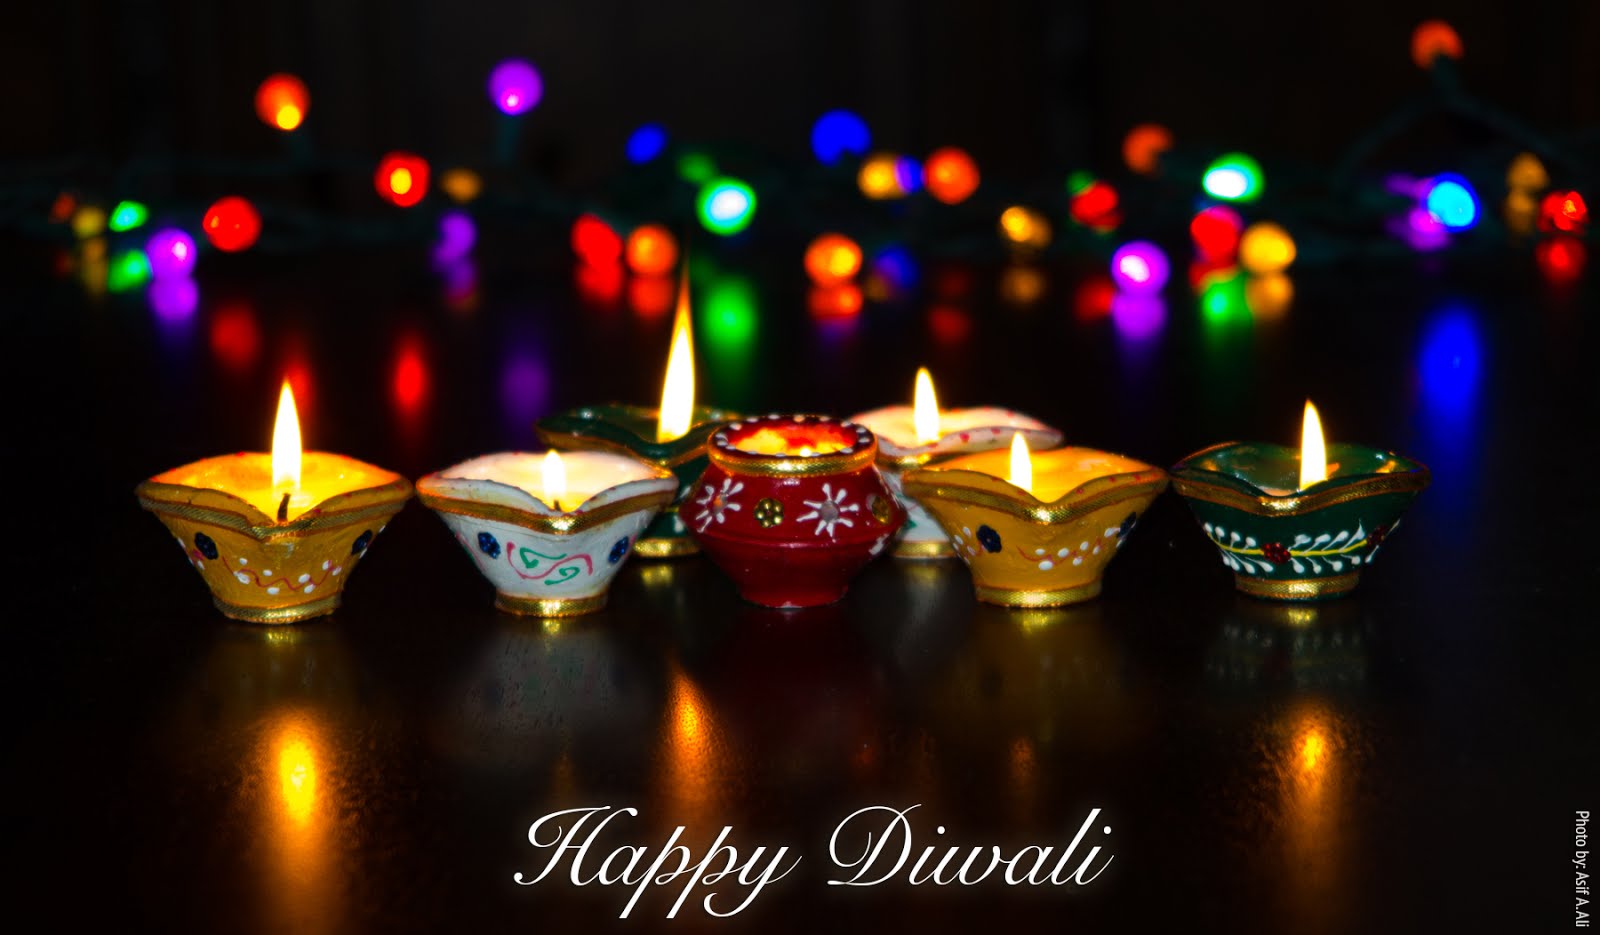 Happy Diwali Pictures - Diwali Images With Wishes , HD Wallpaper & Backgrounds